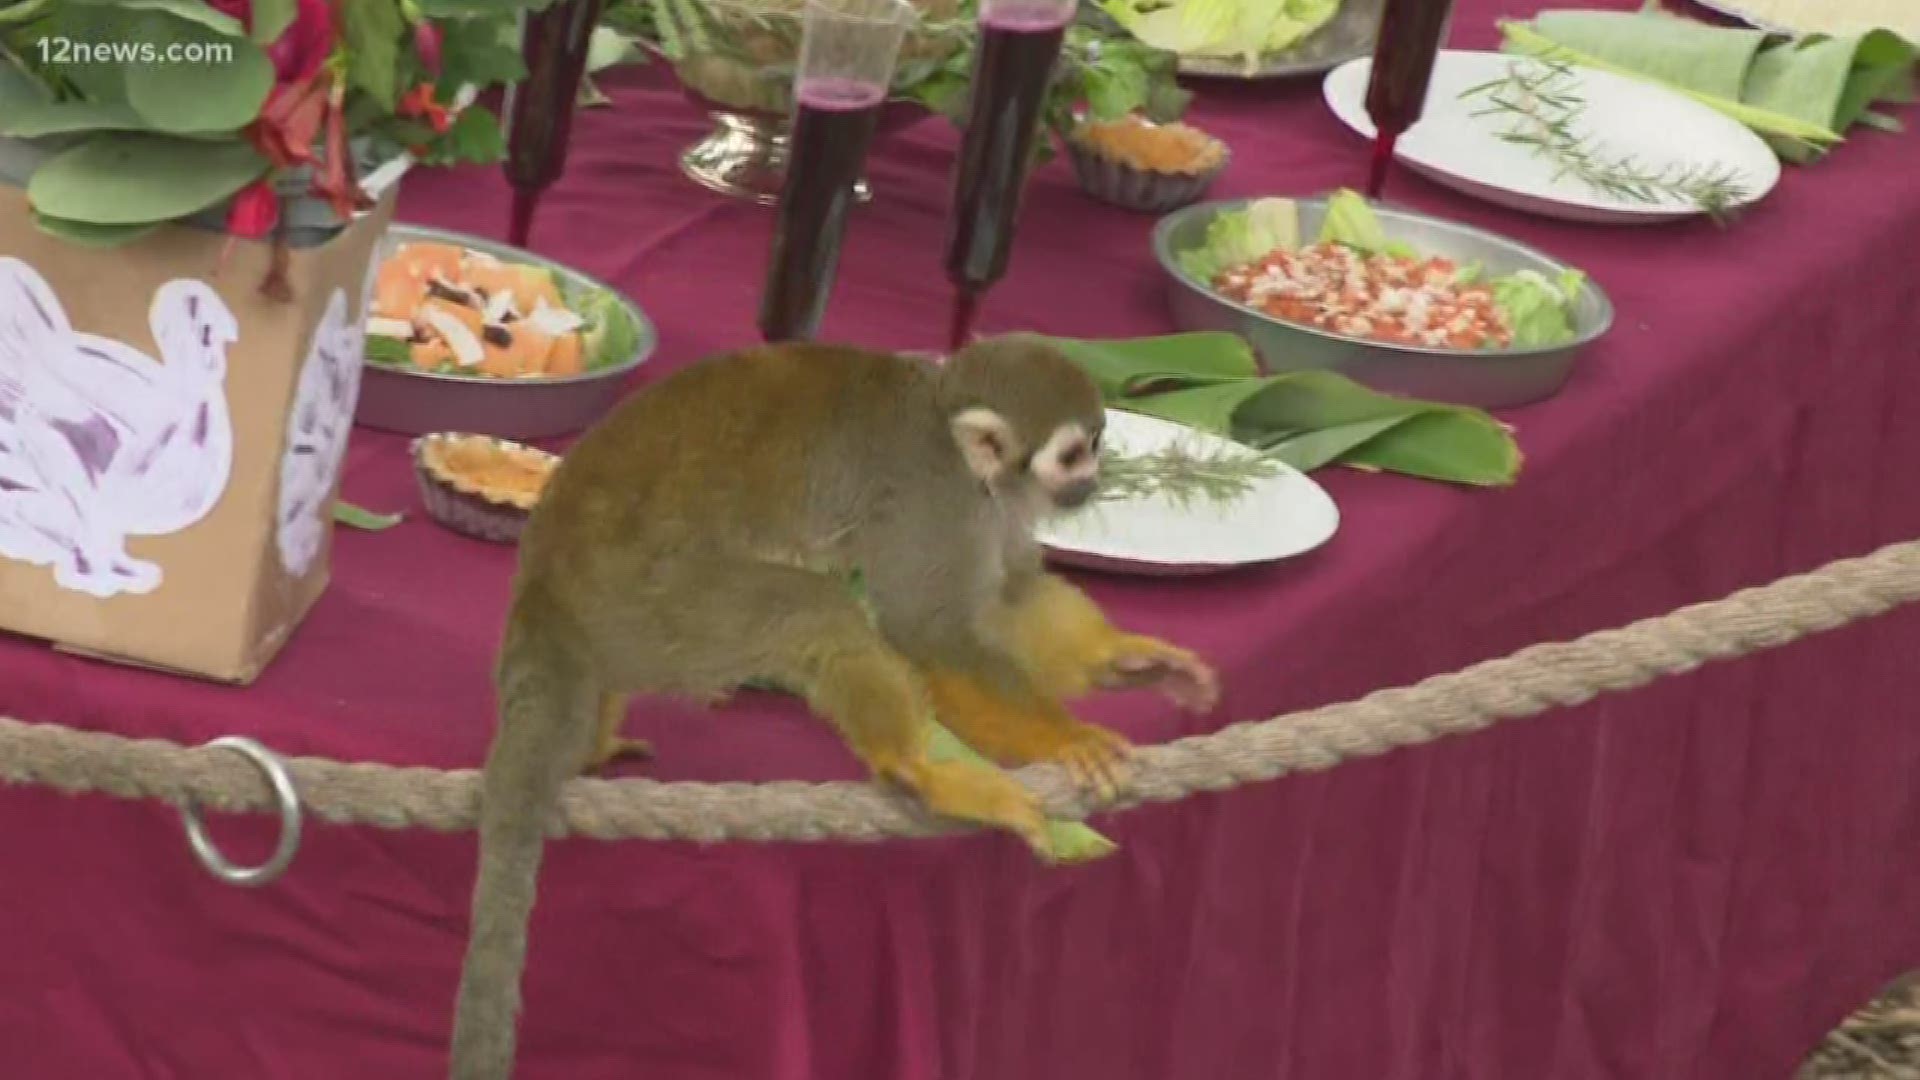 The squirrel monkeys at the Phoenix Zoo got to enjoy a Thanksgiving meal of their own. The keepers prepared a meal for the primates that mimics he human feast.